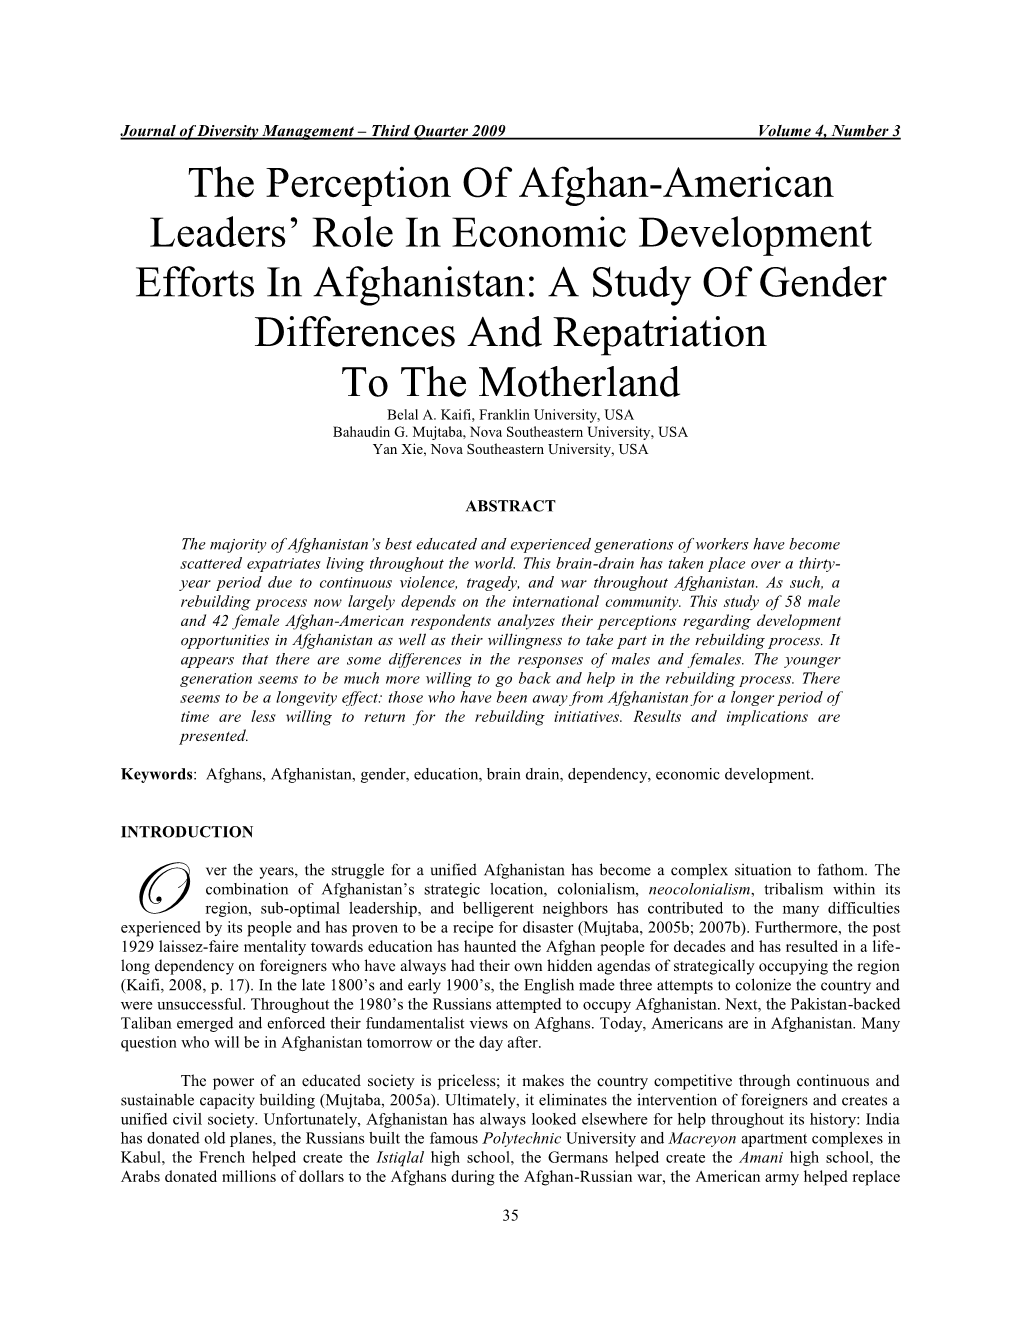 The Perception of Afghan-American Leaders' Role In